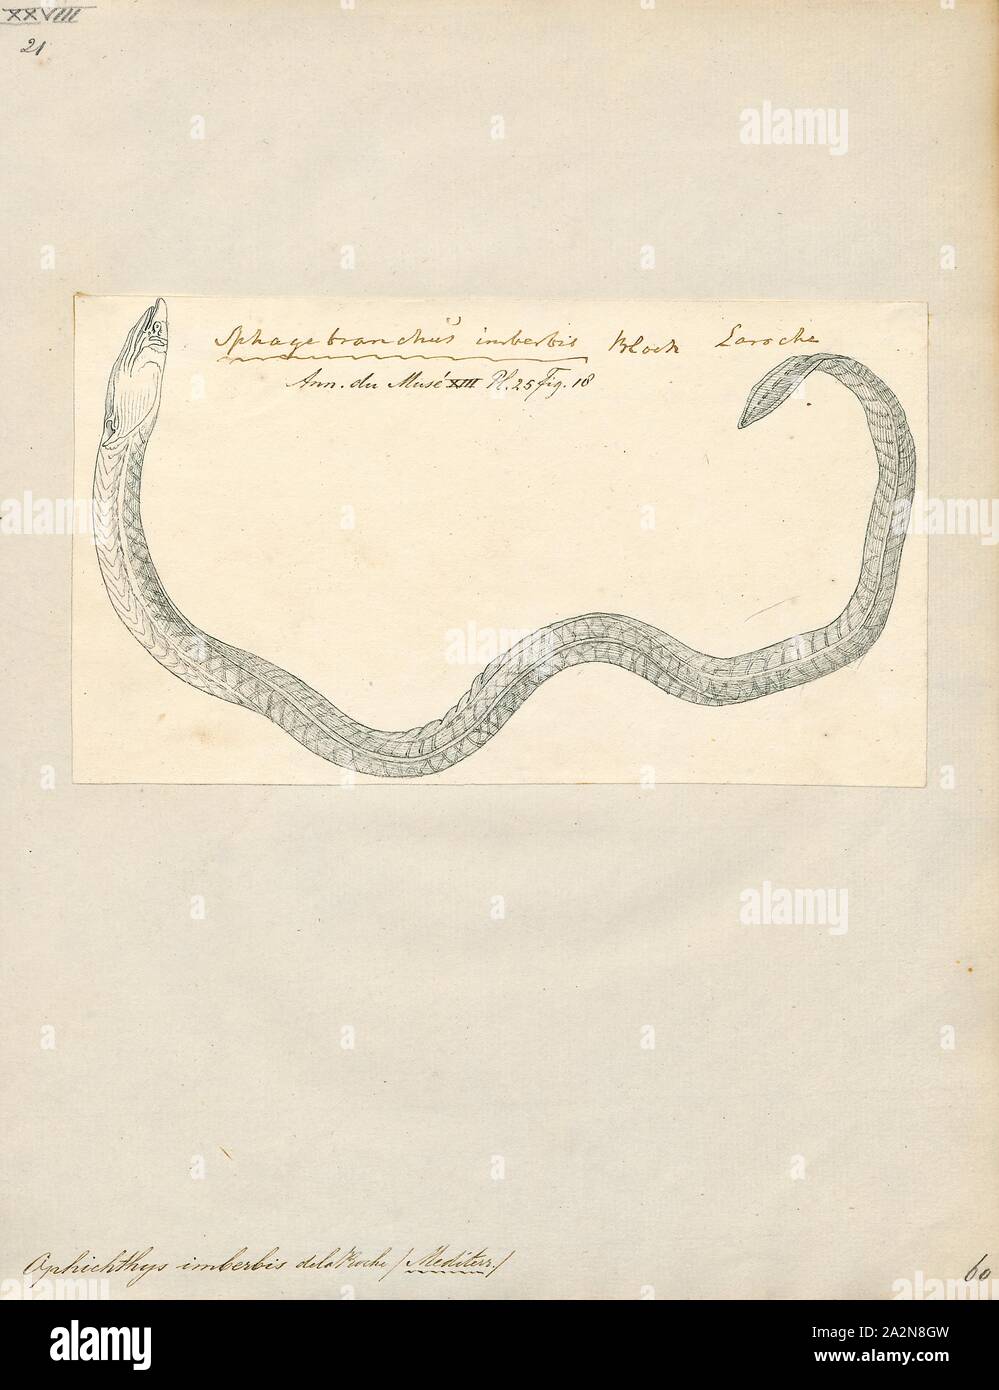 Ophichthys imberbis, Print, The armless snake eel (Dalophis imberbis) is an eel in the family Ophichthidae (worm/snake eels). It was described by François Étienne Delaroche in 1809. It is a subtropical, marine eel which is known from the eastern Atlantic Ocean, including Spain, Mauritania, and the Mediterranean. It dwells at a depth range of 20–80 metres, and forms burrows in mud or sand. Males can reach a maximum total length of 150 centimetres., 1809 Stock Photo